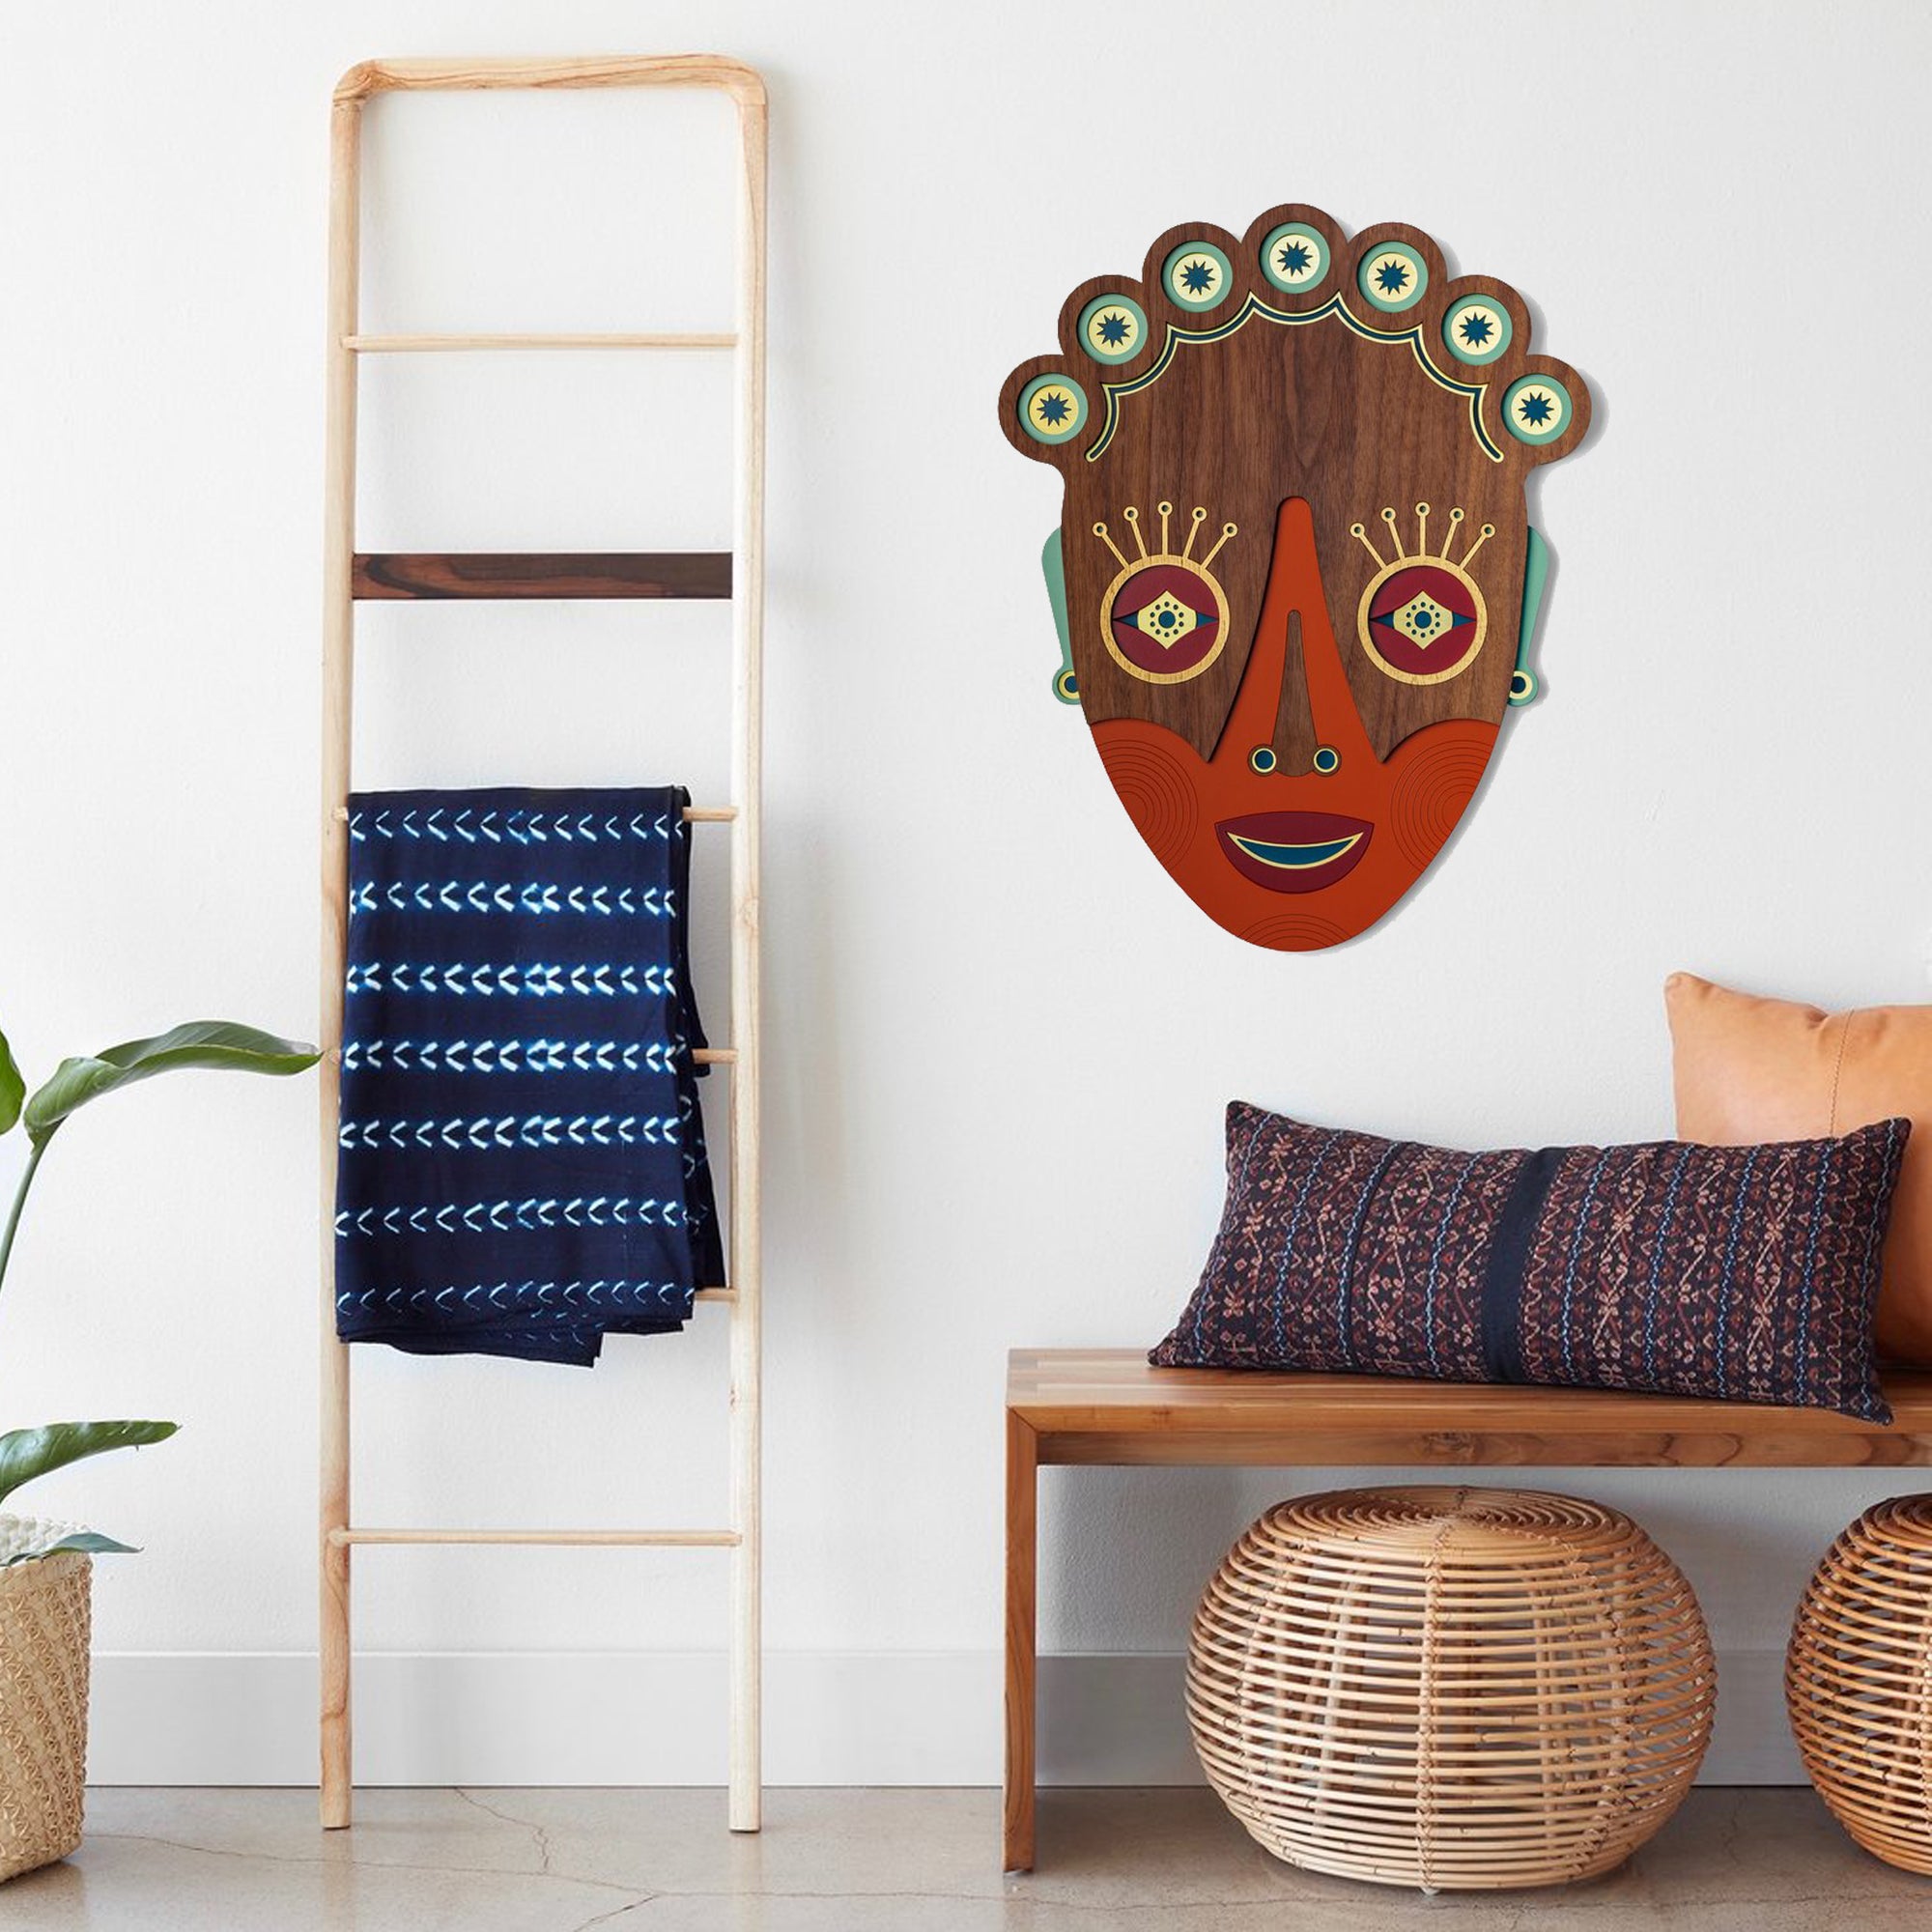 Home Sweet Home Wall Decor by Tribal Masks